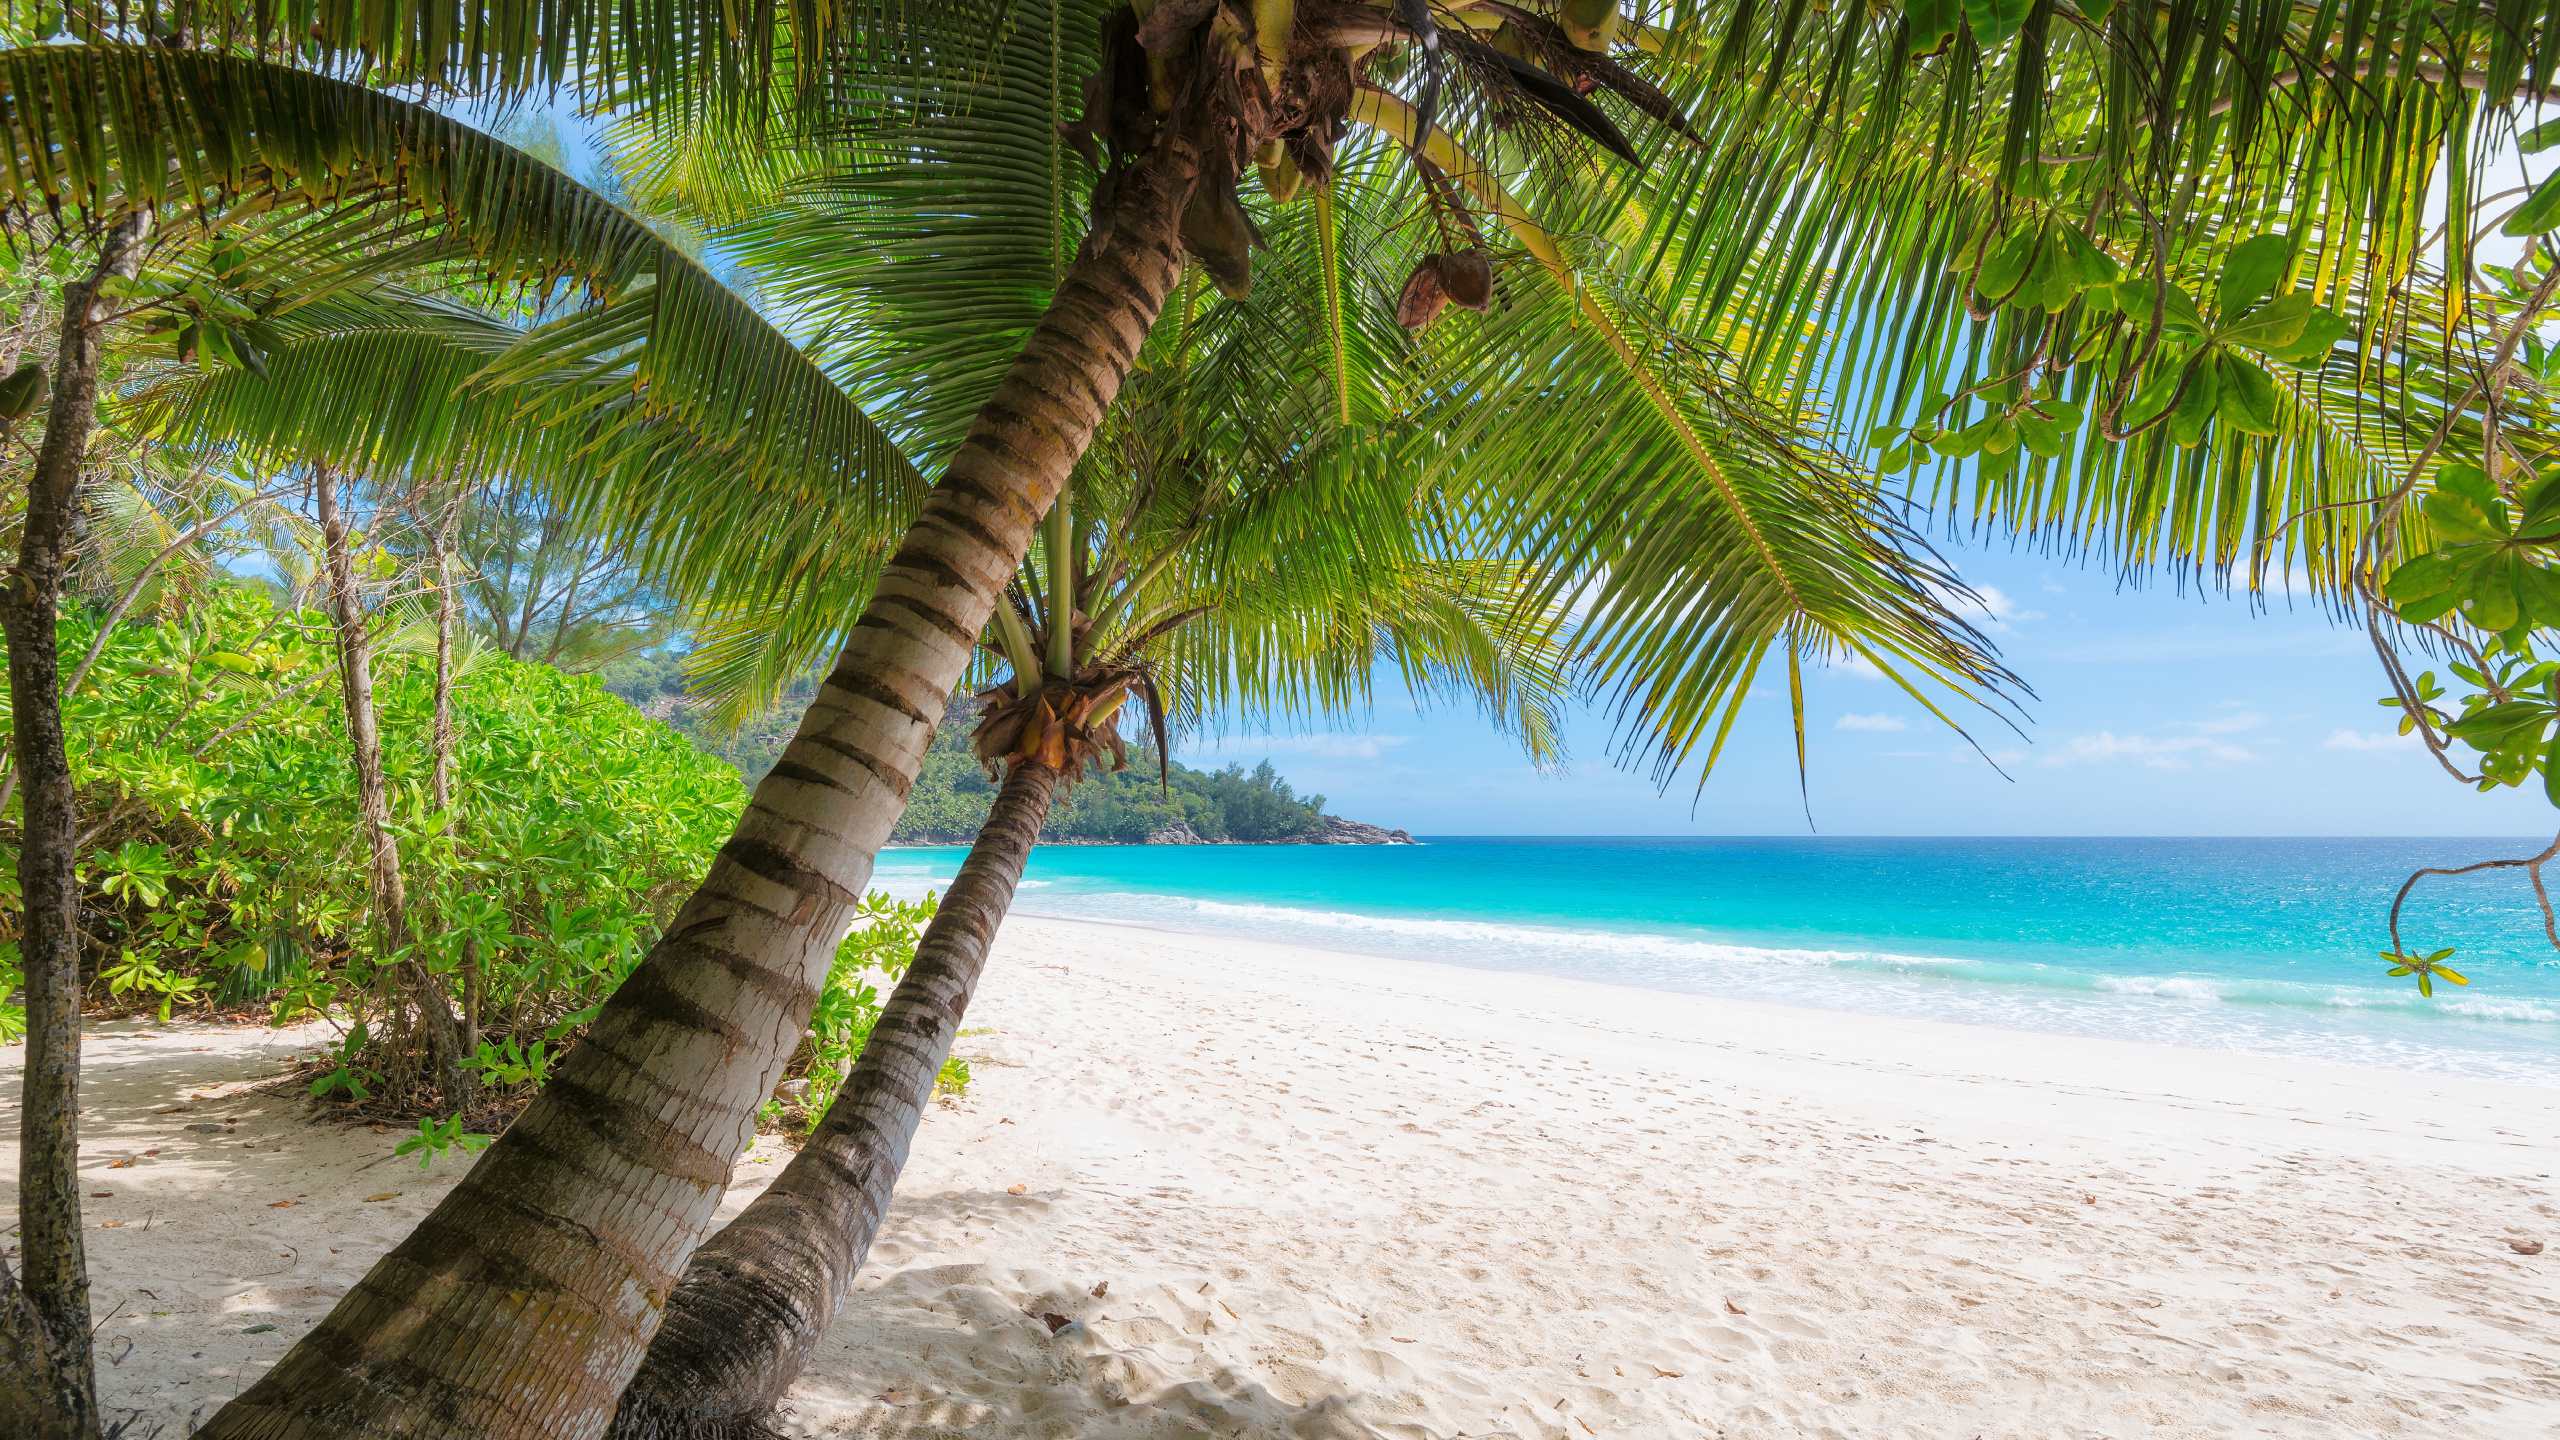 Coconut Tree on White Sand Beach During Daytime. Wallpaper in 2560x1440 Resolution